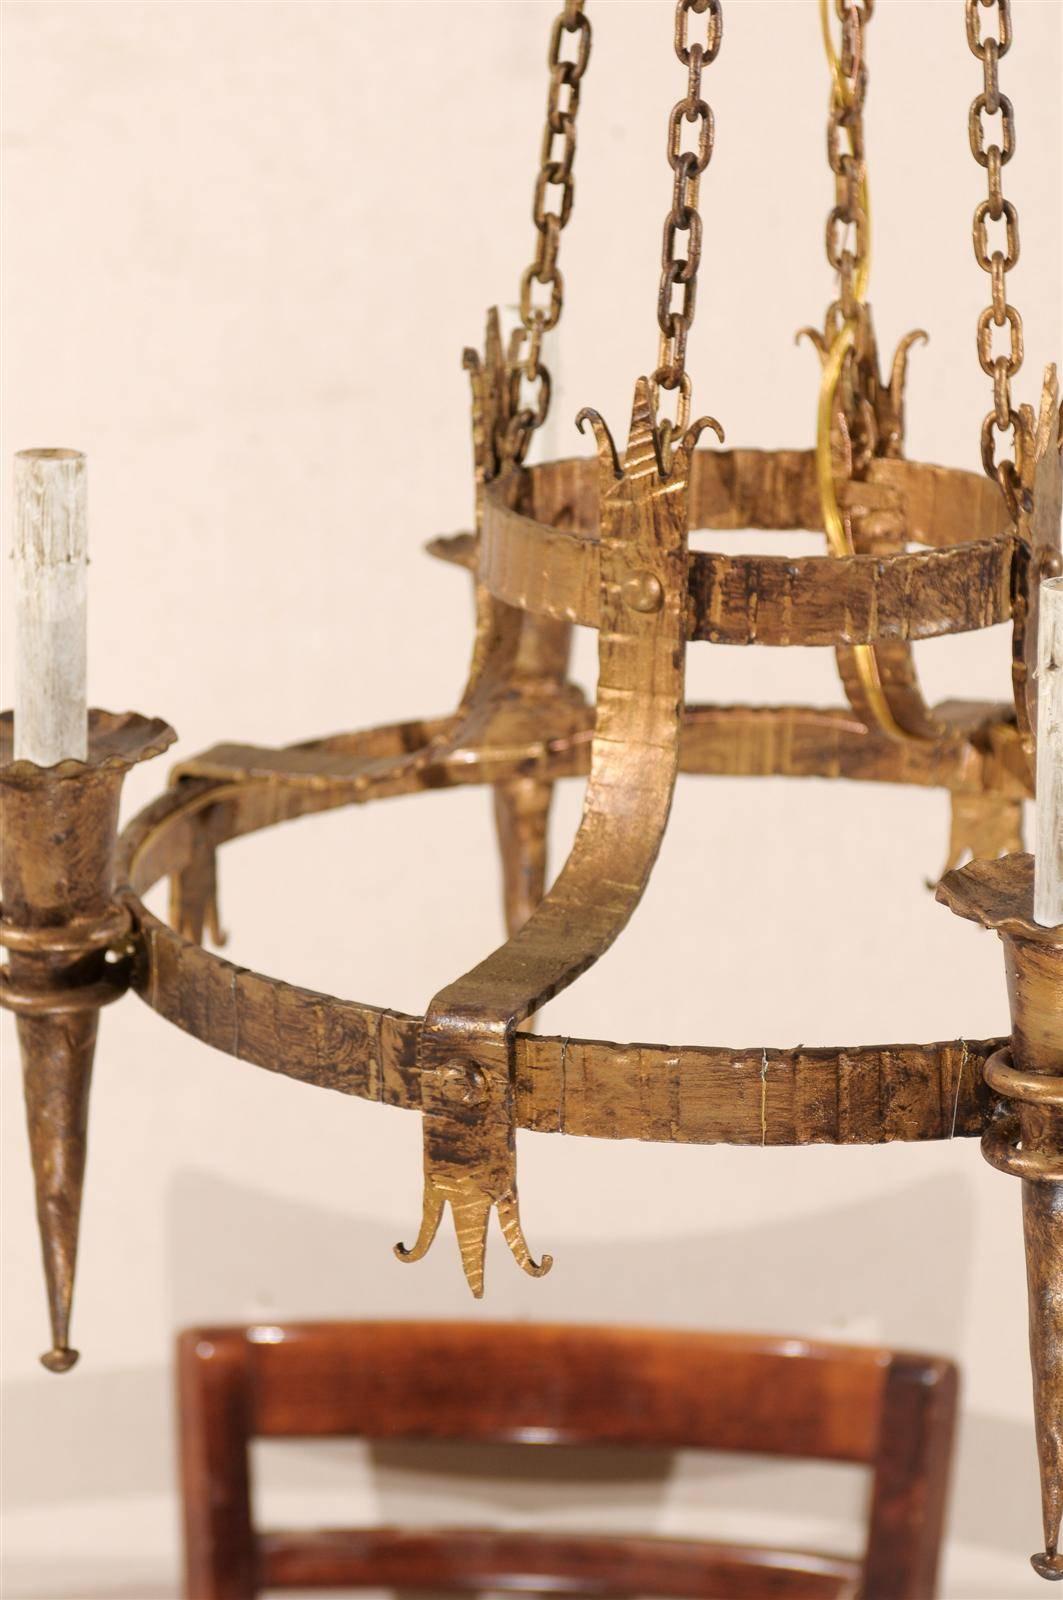 Medieval Pair of French Gilt-Metal Ring Chandeliers w/Torch Lights & Fleur-de-Lys Accents